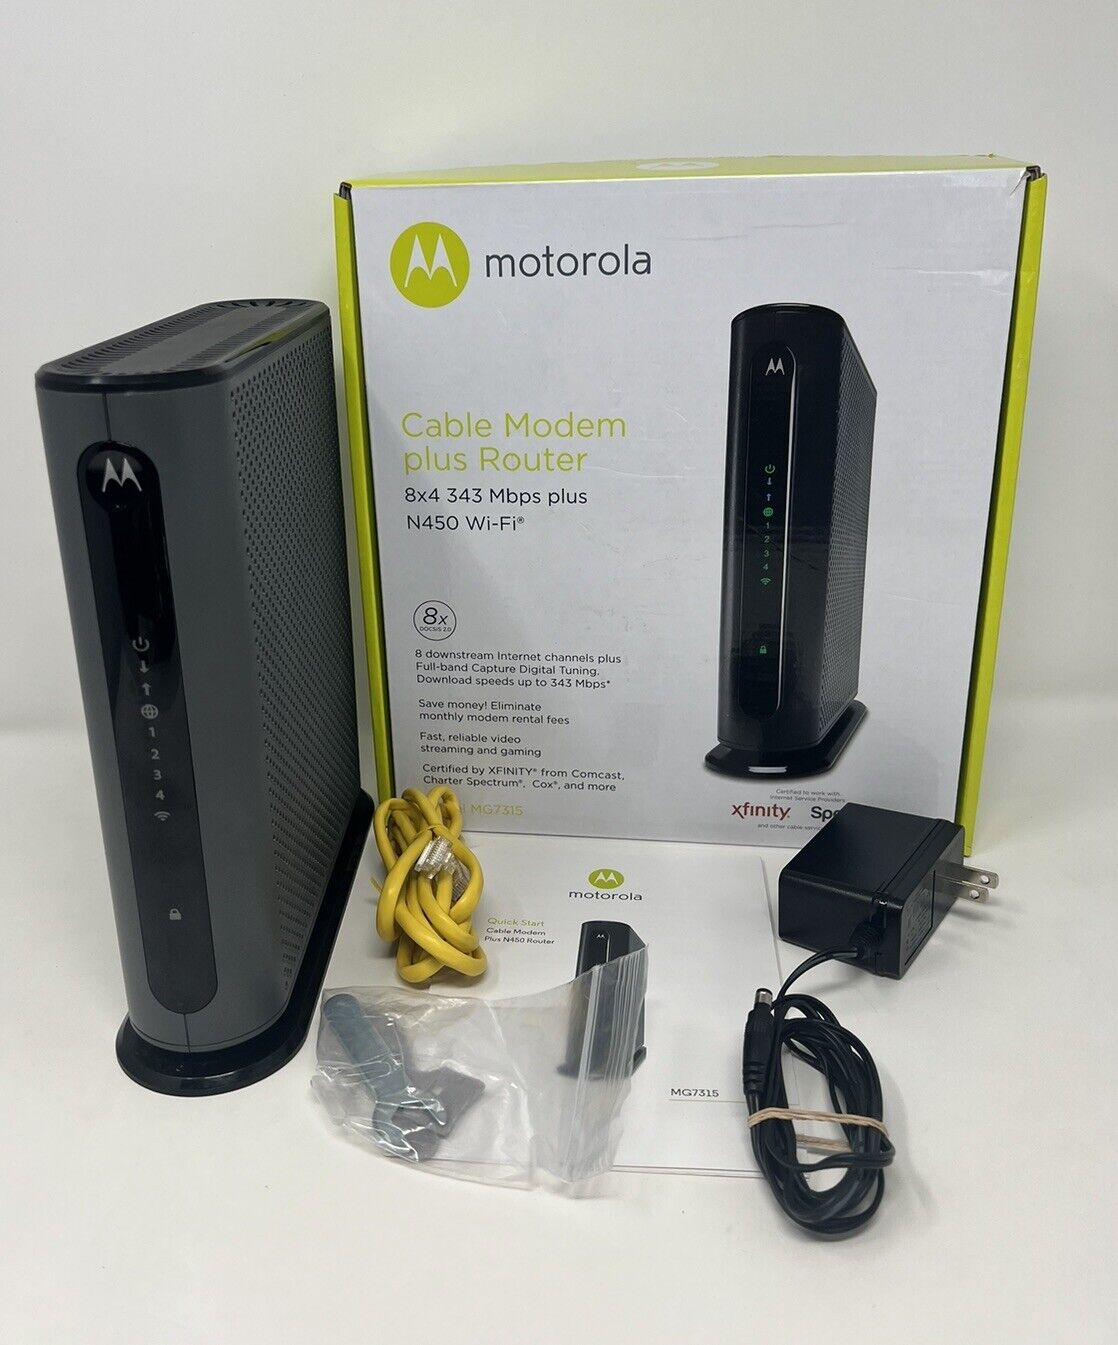 Motorola MG7315 8x4 343 Mbps DOCSIS 3.0 Cable Modem Plus N450 Wi-Fi Router-Used